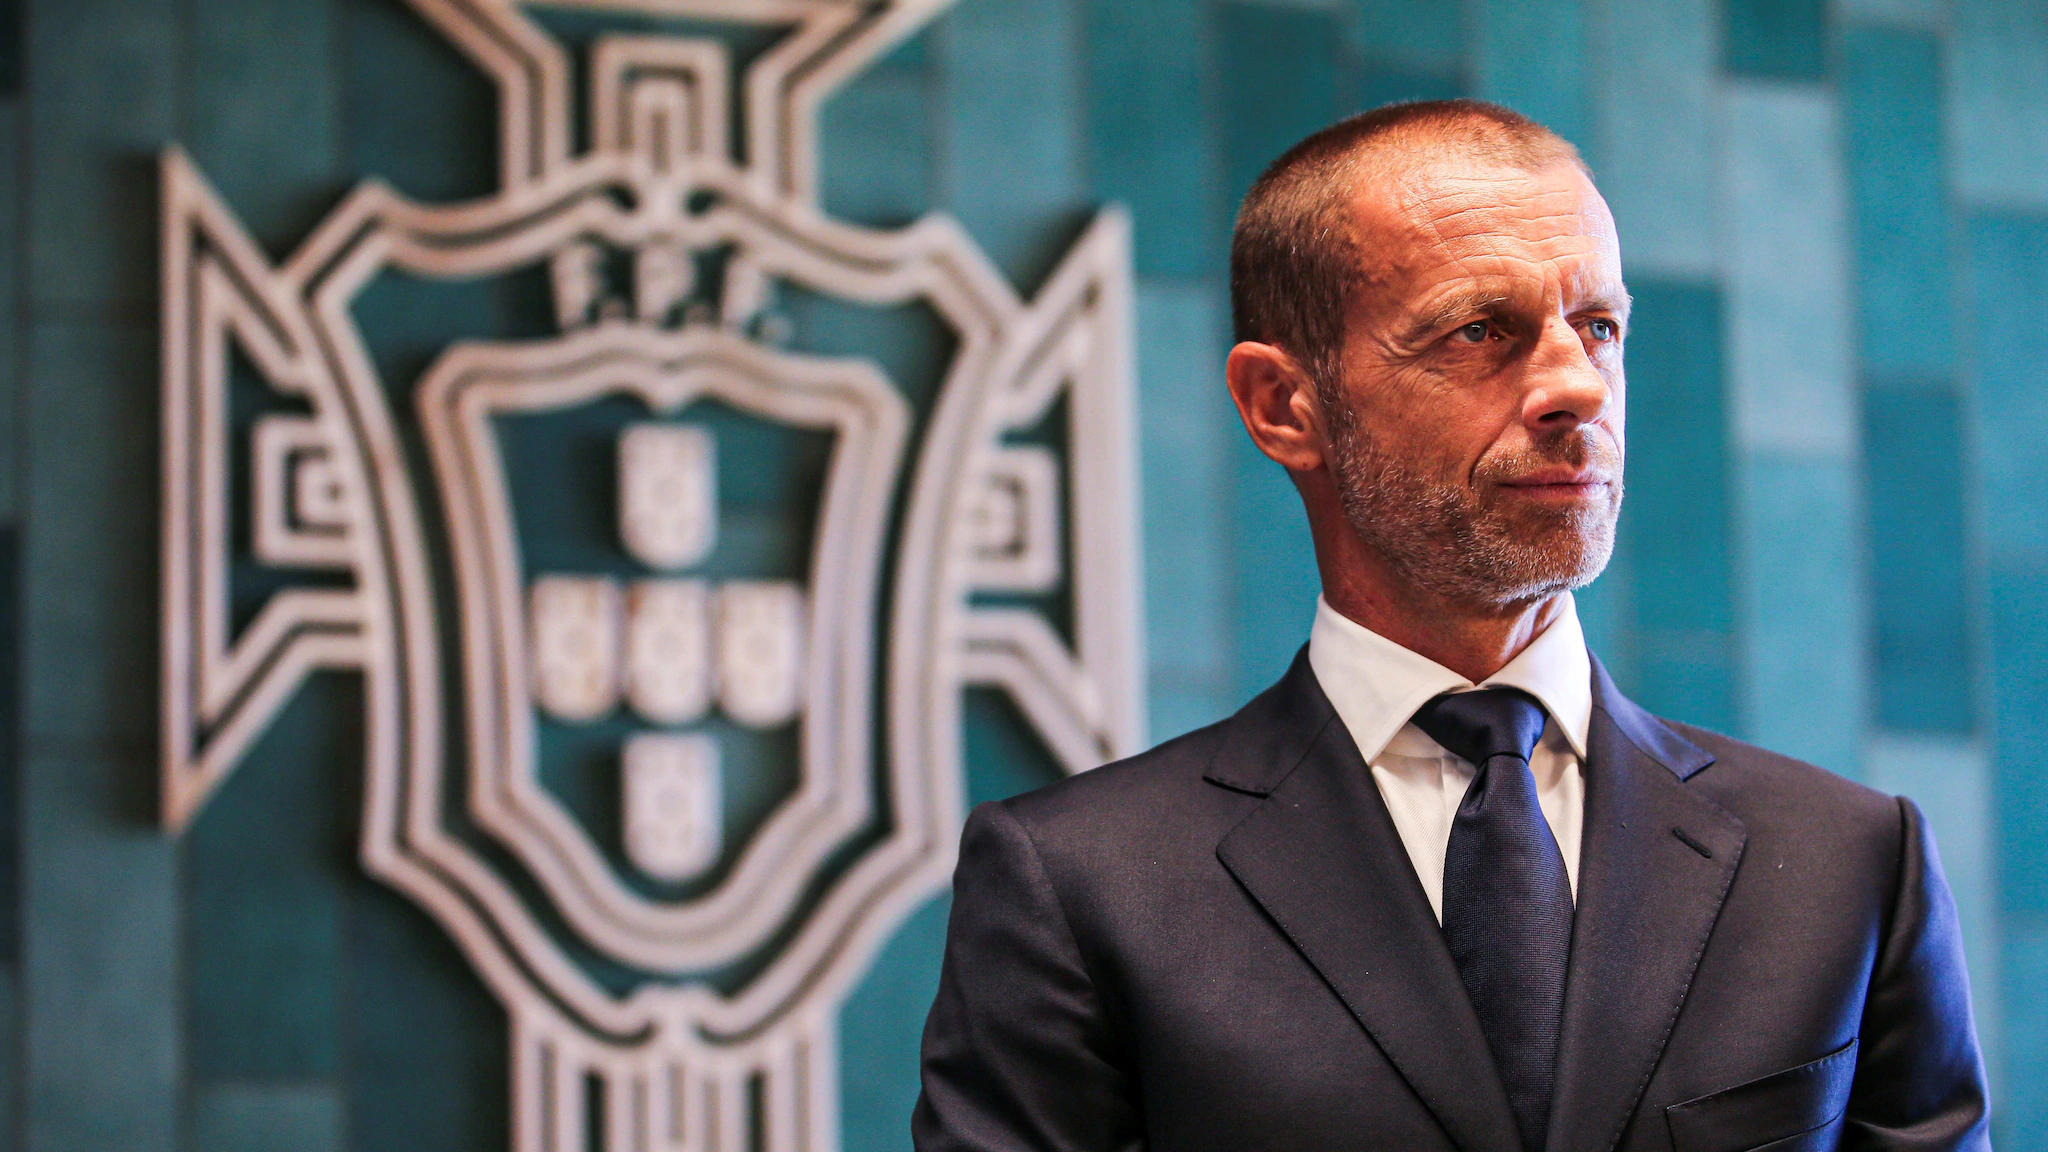 See Spain and Portugal’s joint bid for 2030 World Cup as winning bid, claims Aleksandr Ceferin